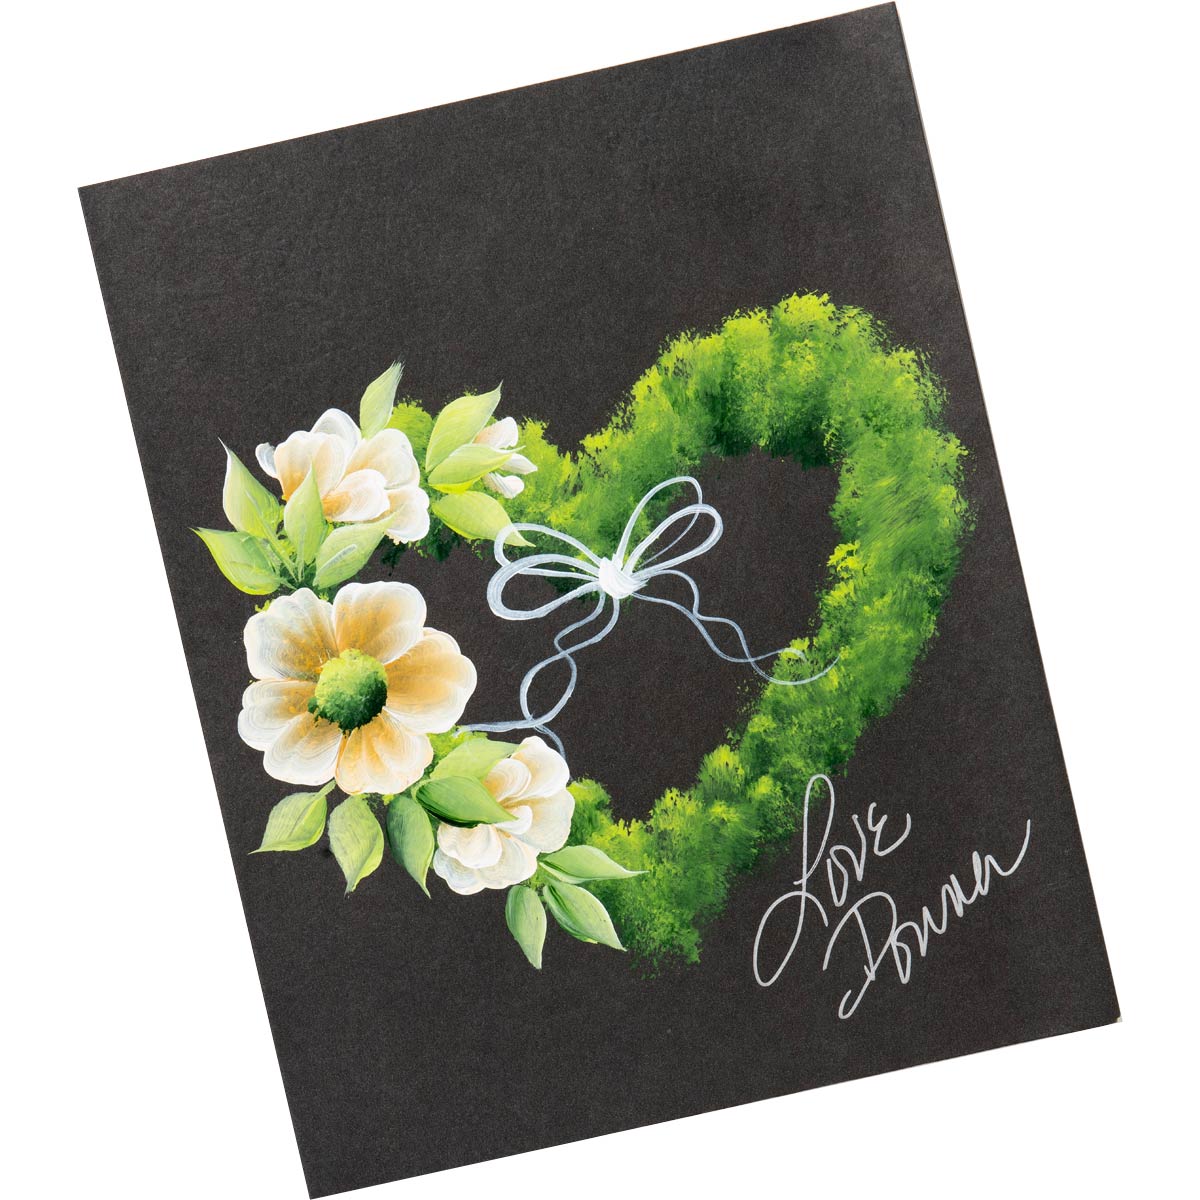 Let's Paint with FolkArt ® One Stroke™ Kit - Wreath of the Month - 99436